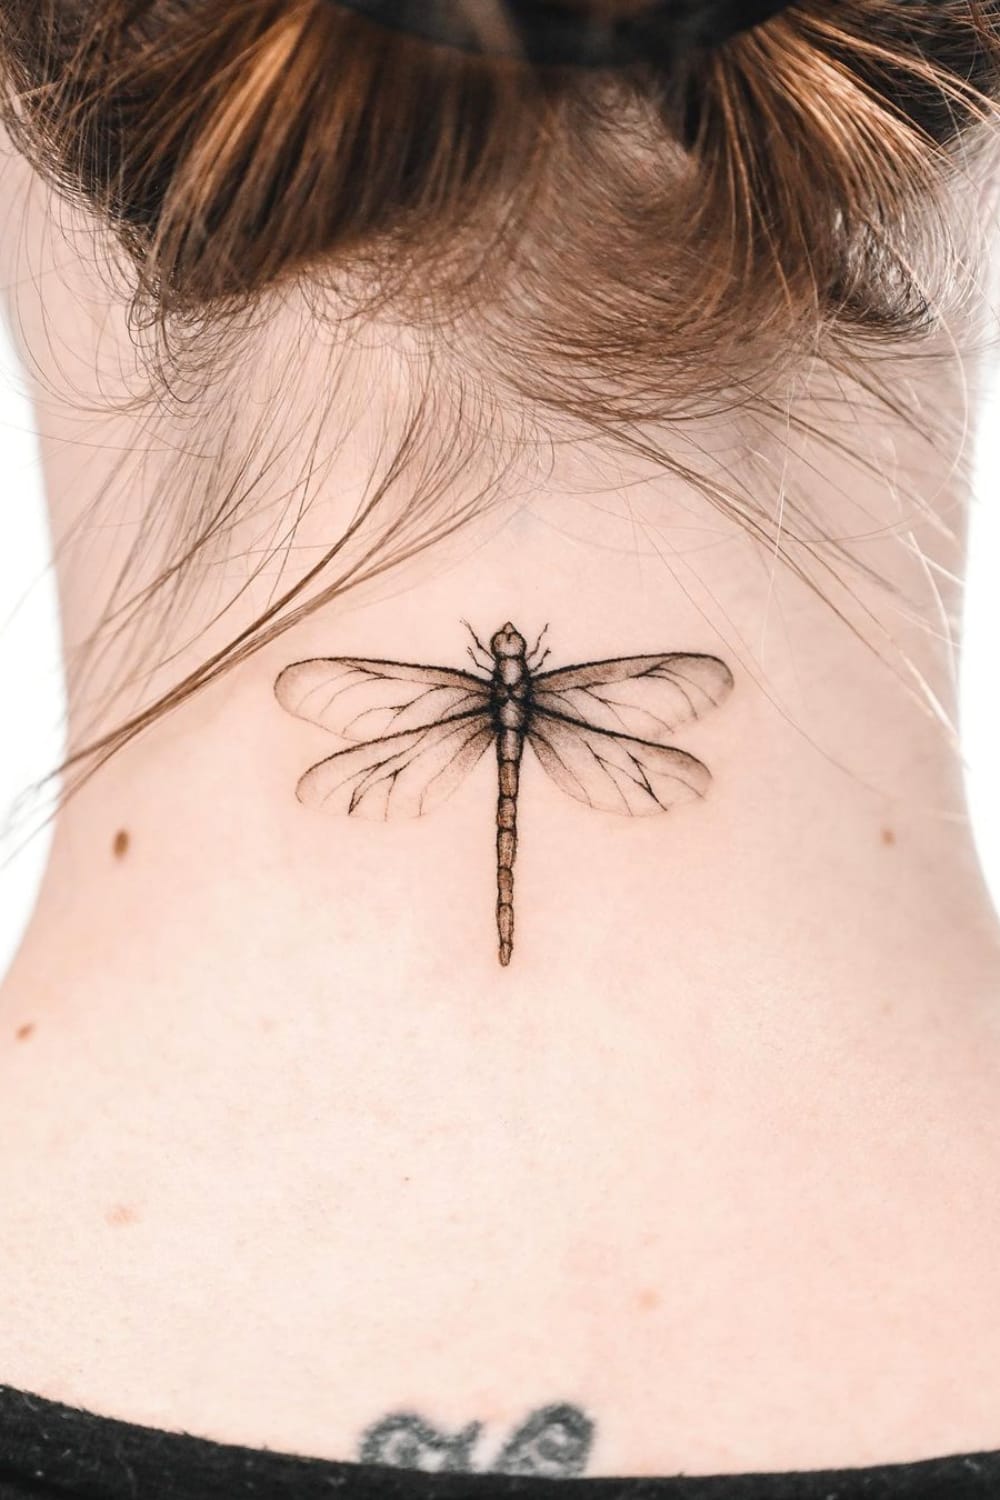 Dragonfly Tattoo On The Neck